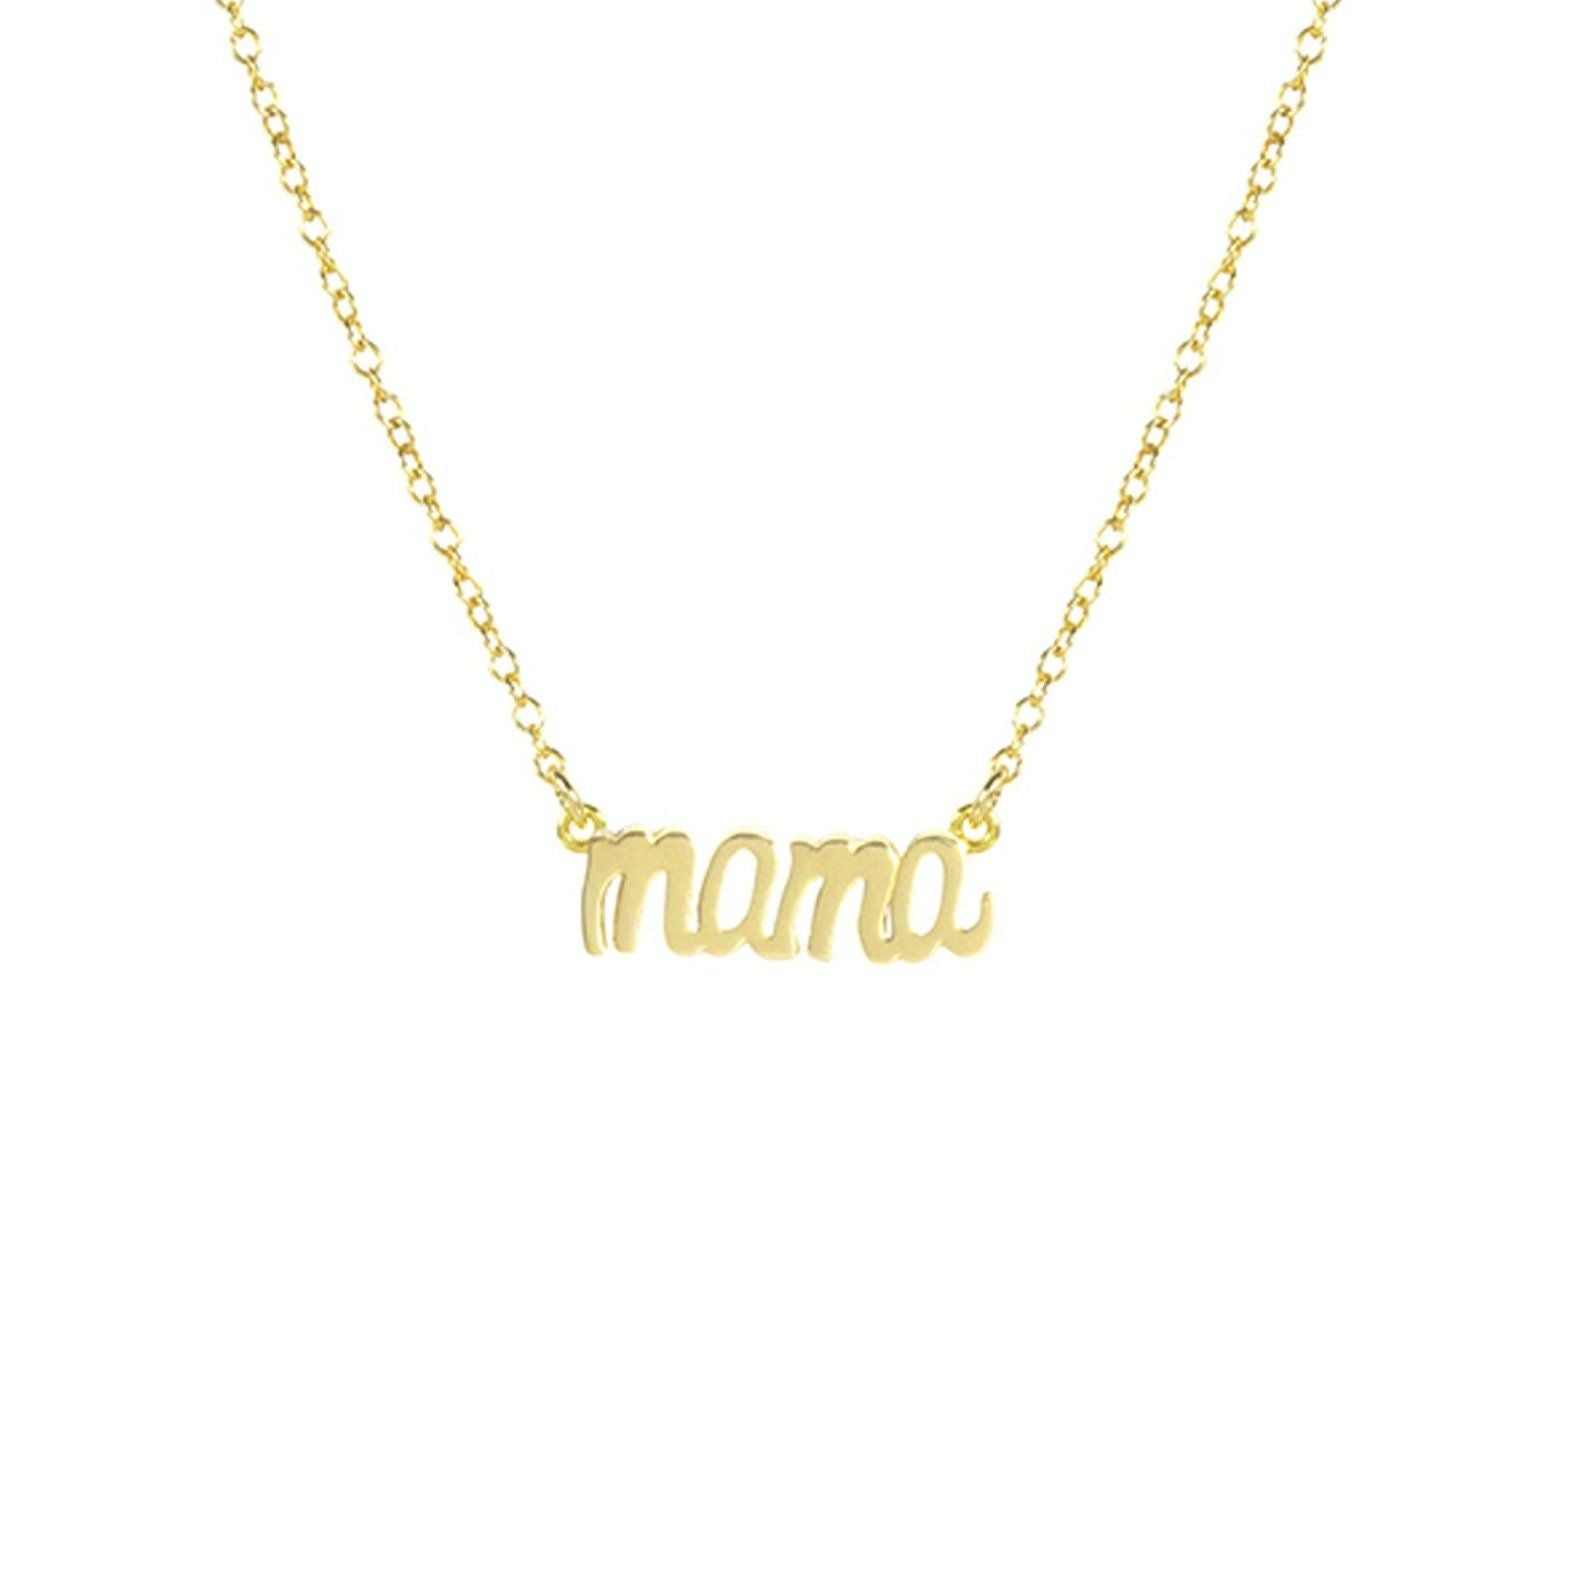 Dainty gold Mama Necklace handmade by Katie Dean Jewelry in America